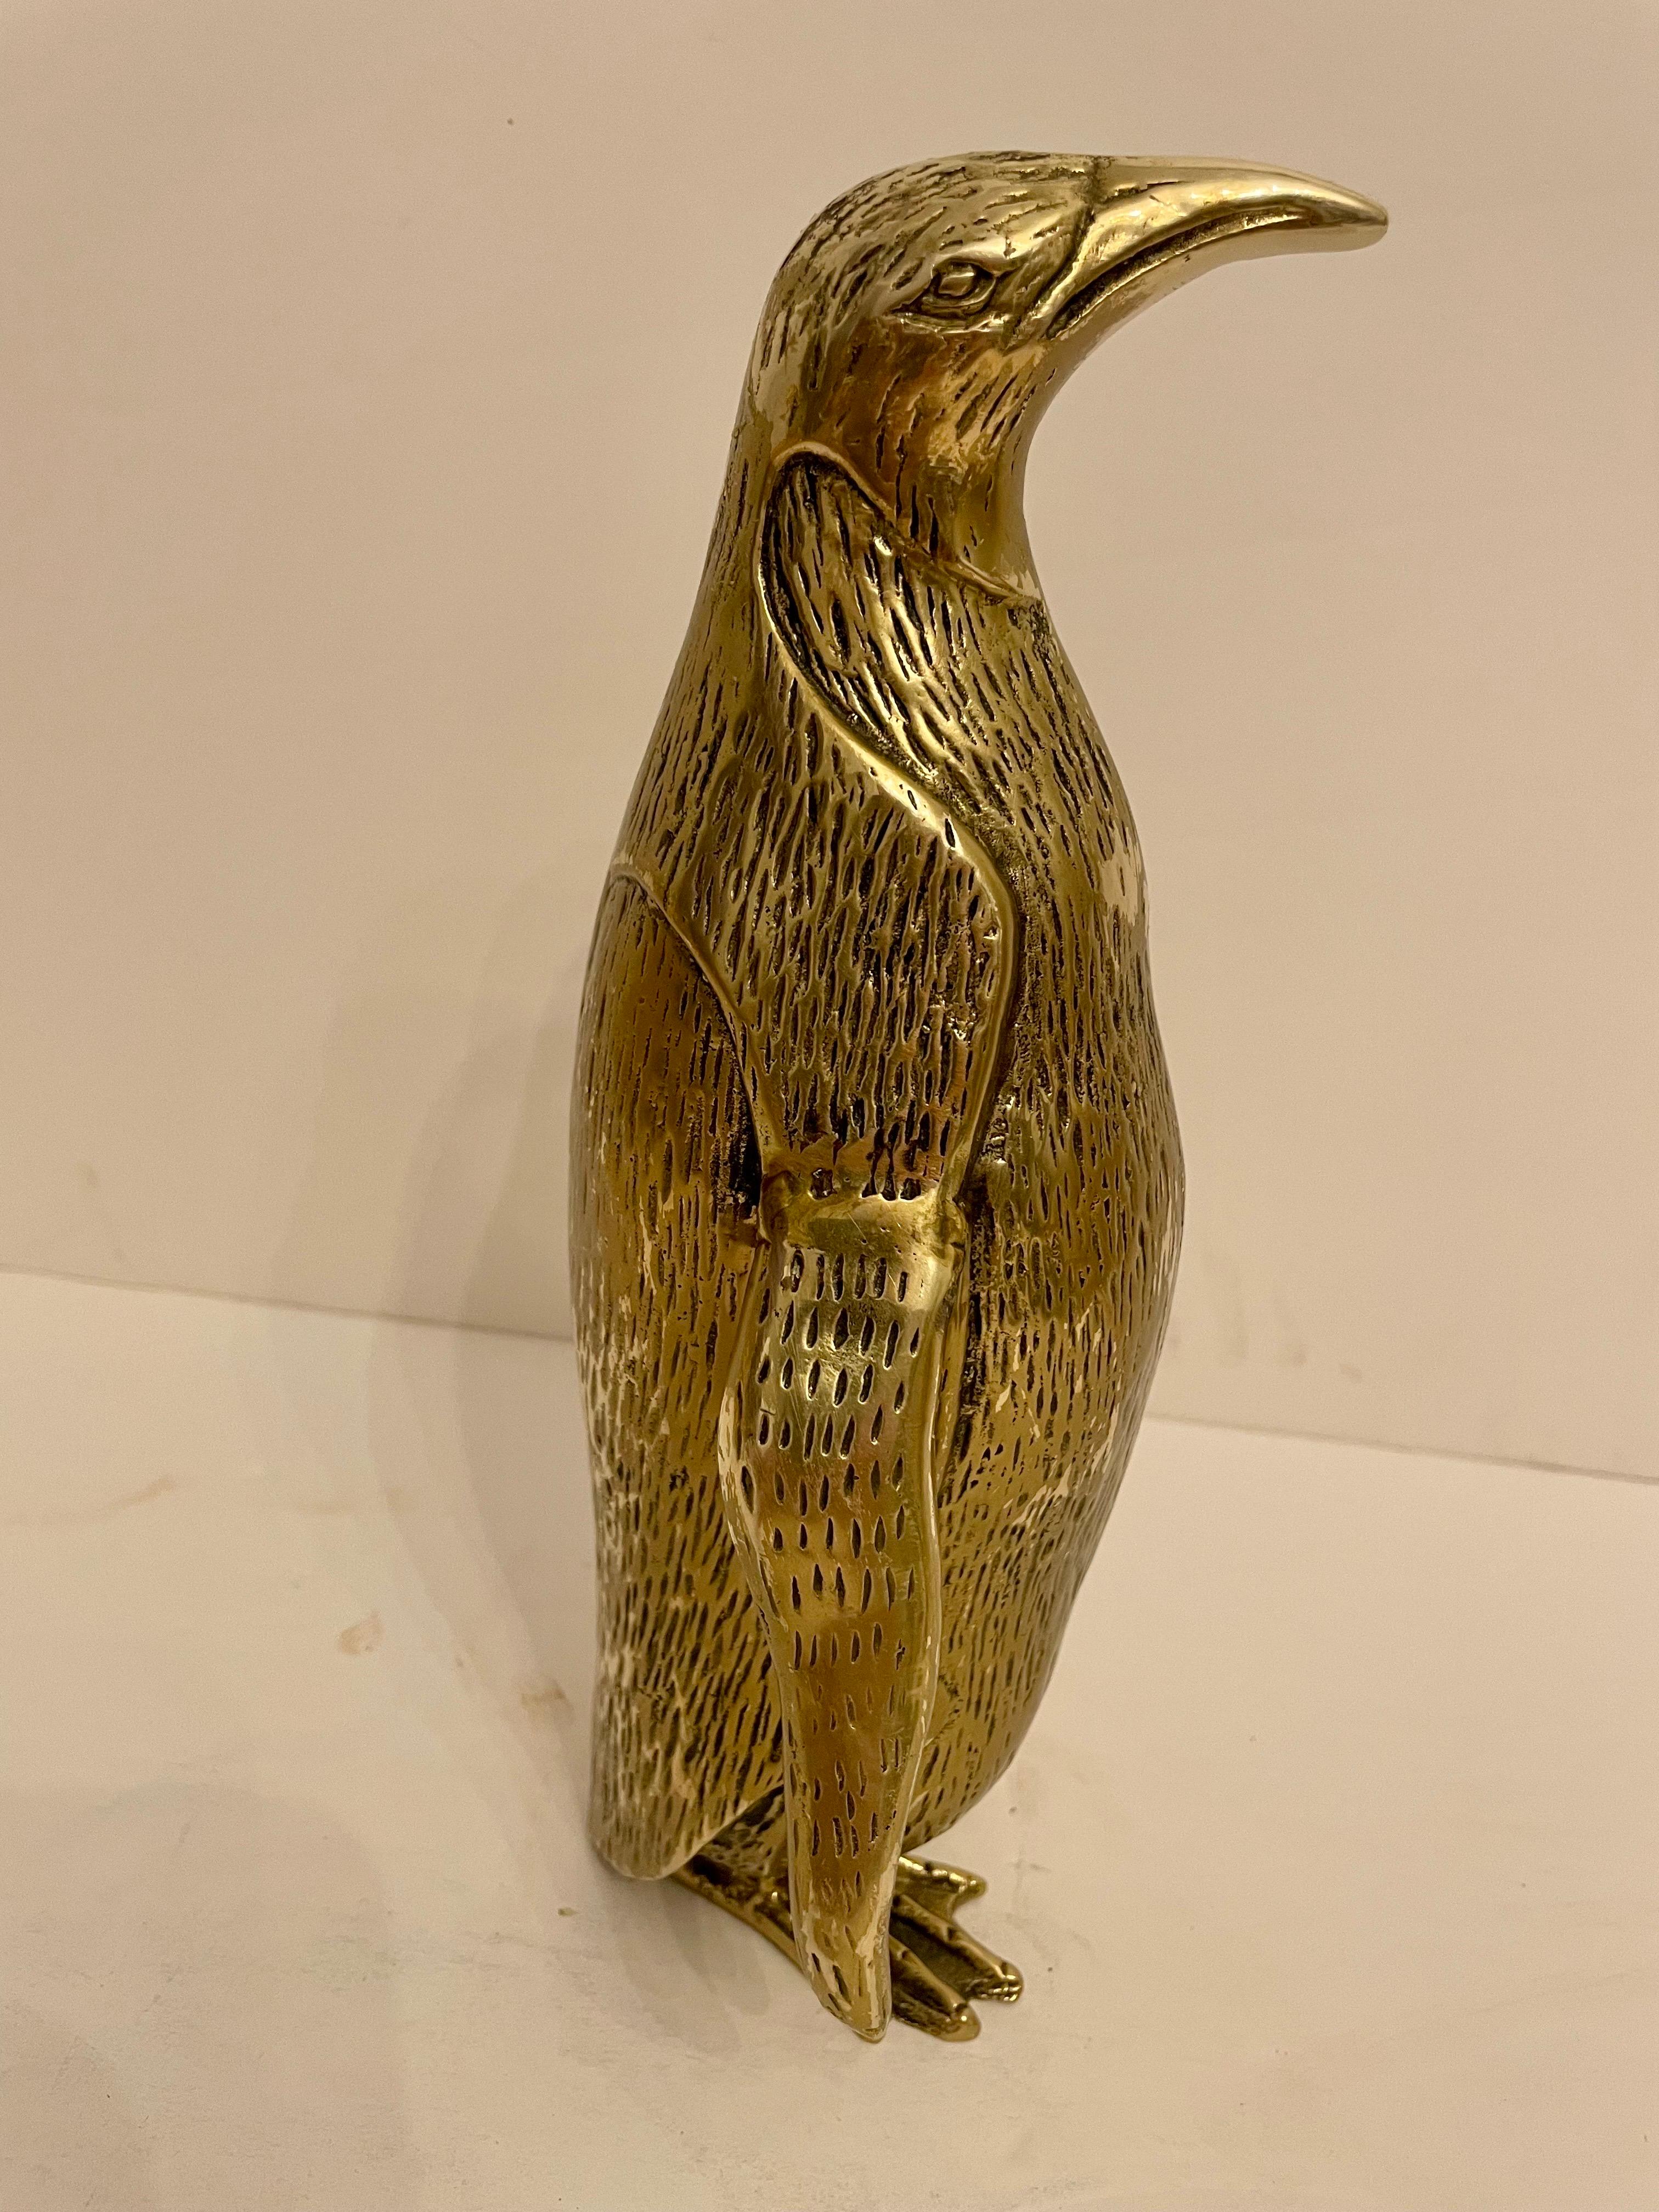 Vintage Hollywood Regency brass Penguin sculpture. Nicely detailed. Original patina intact. Good overall condition. Made in Korea Measures 9.75” tall x 6”wide x 3.5” deep.